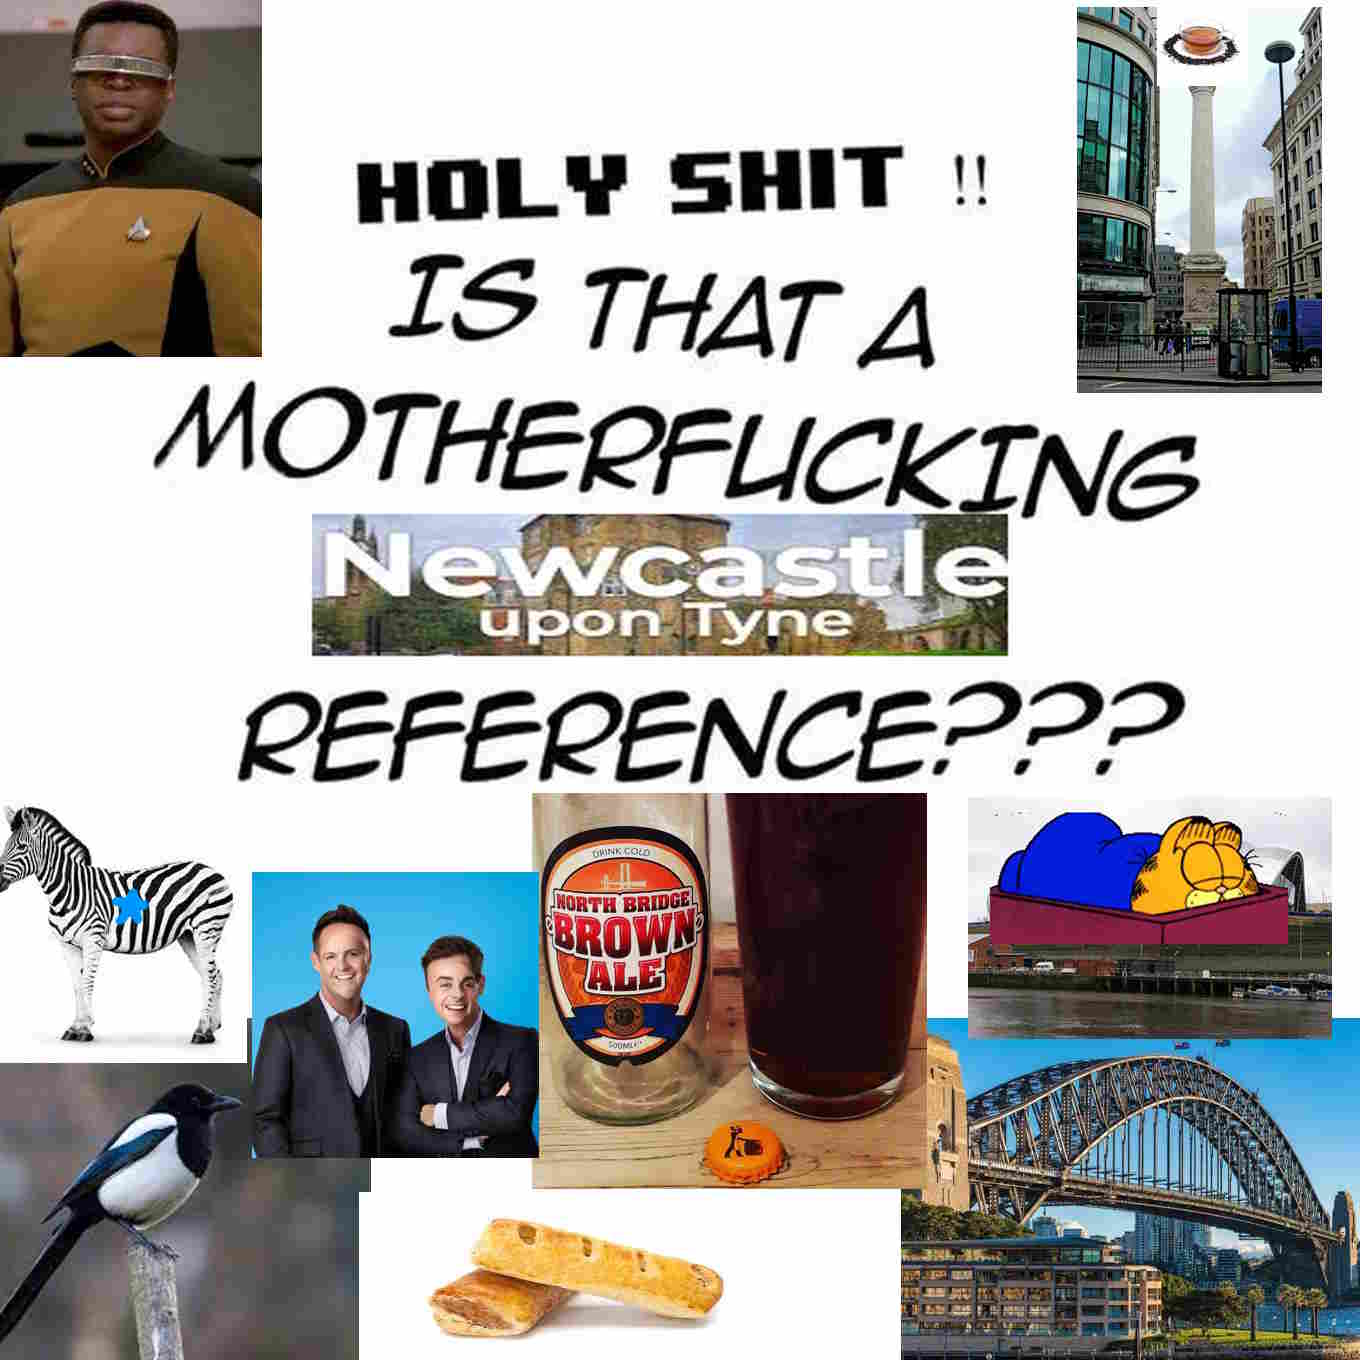 Meme captioned "Holy shit!! Is that a motherfucking [Newcastle upon Tyne] reference???" surrounded by various things which almost look like things from Newcastle